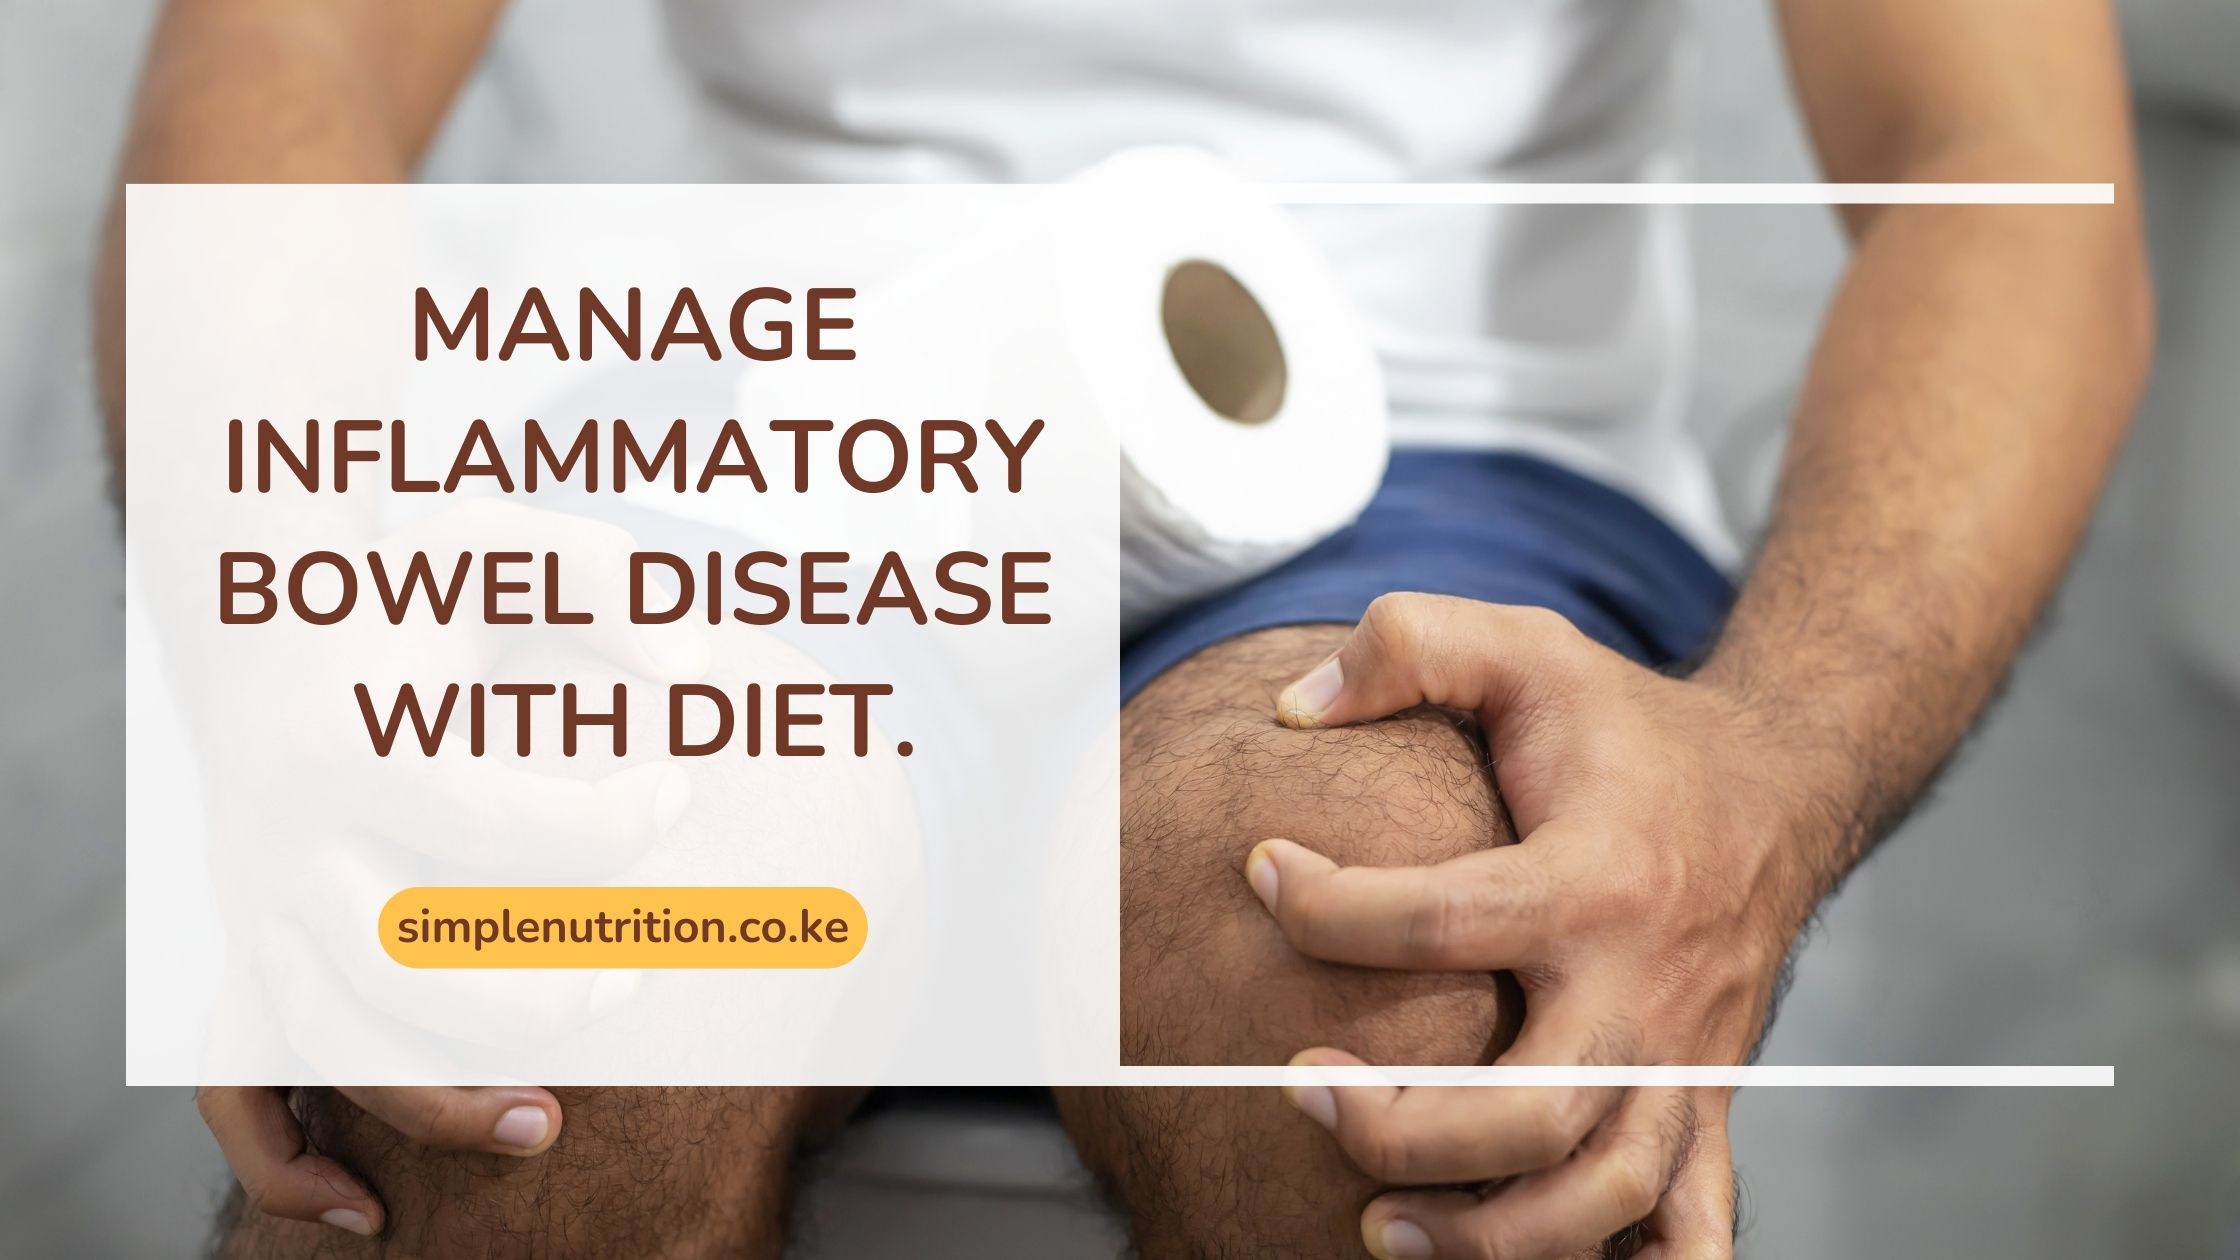 How To Manage Inflammatory Bowel Disease with diet.